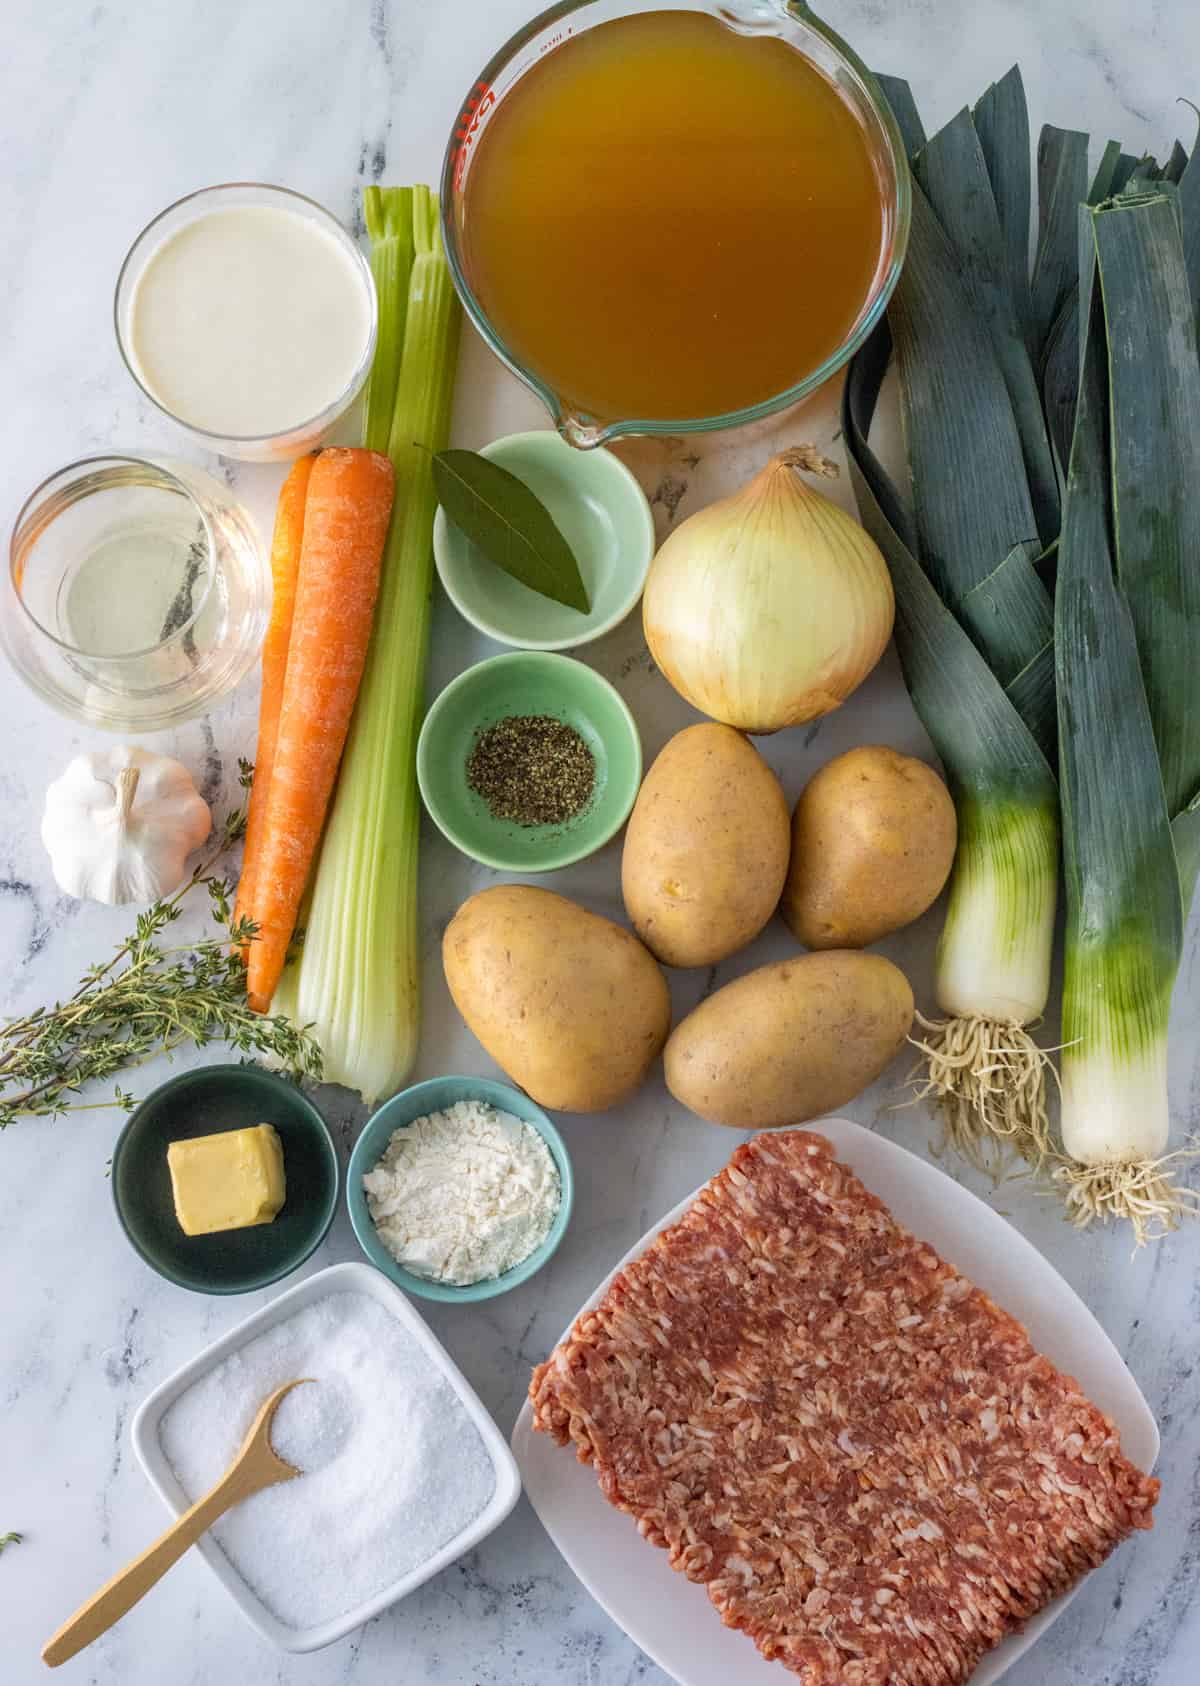 Ingredients for sausage and potato soup.